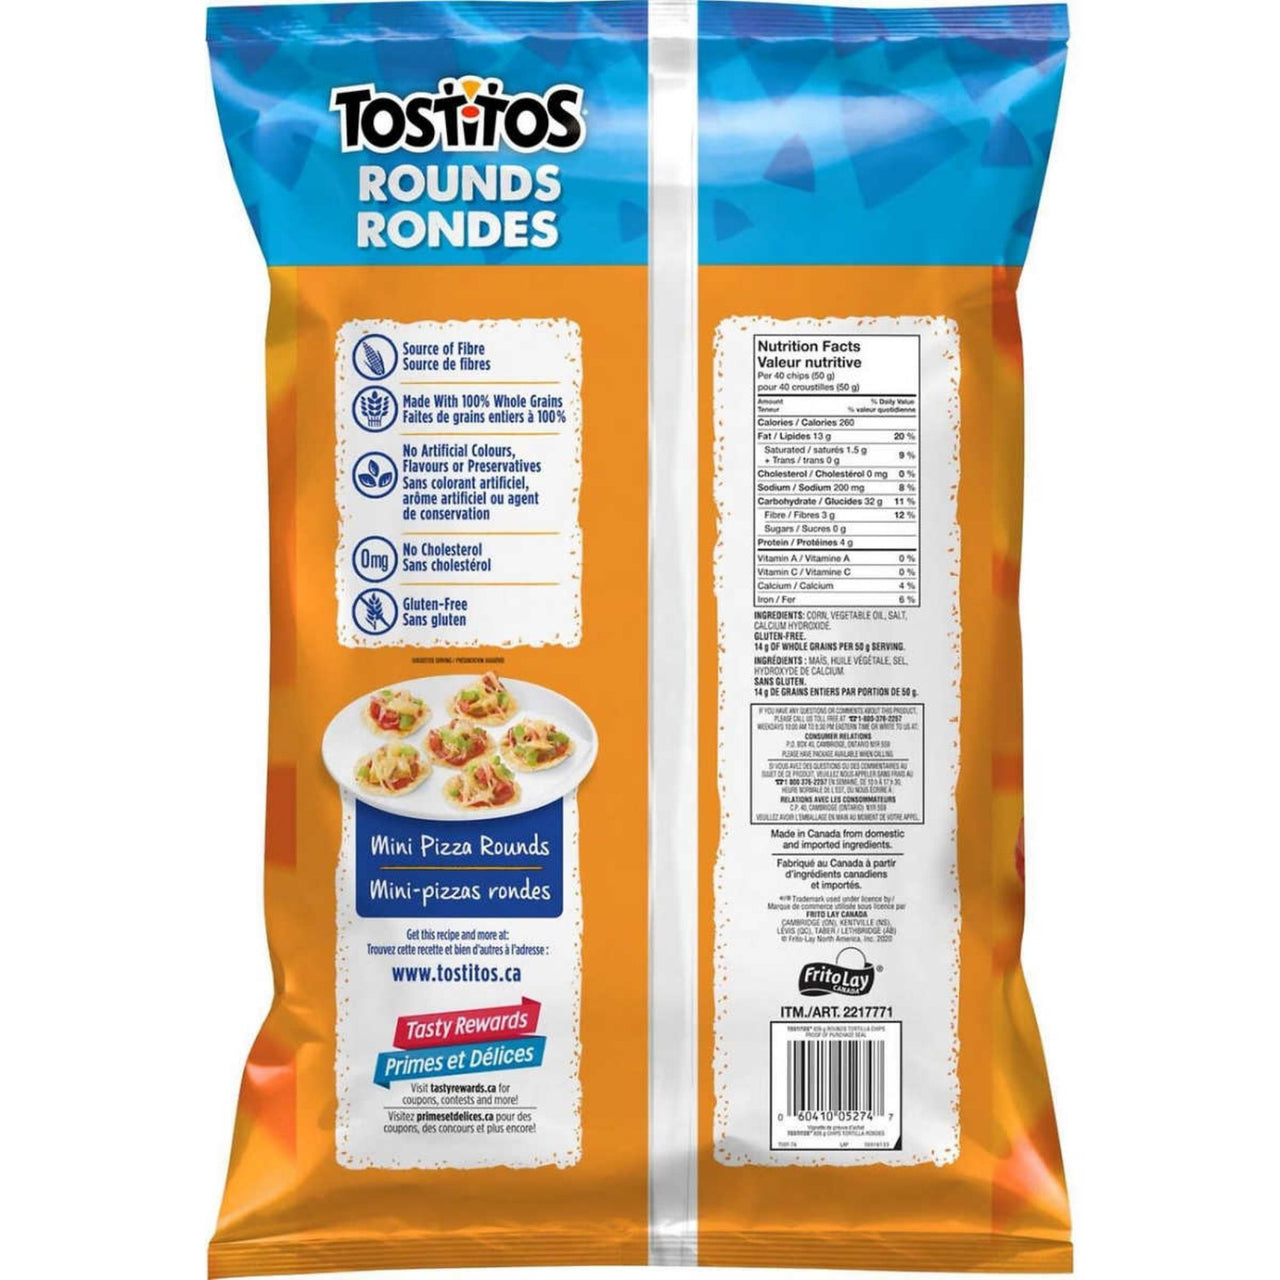 Image of Frito Lay Tostitos Rounds